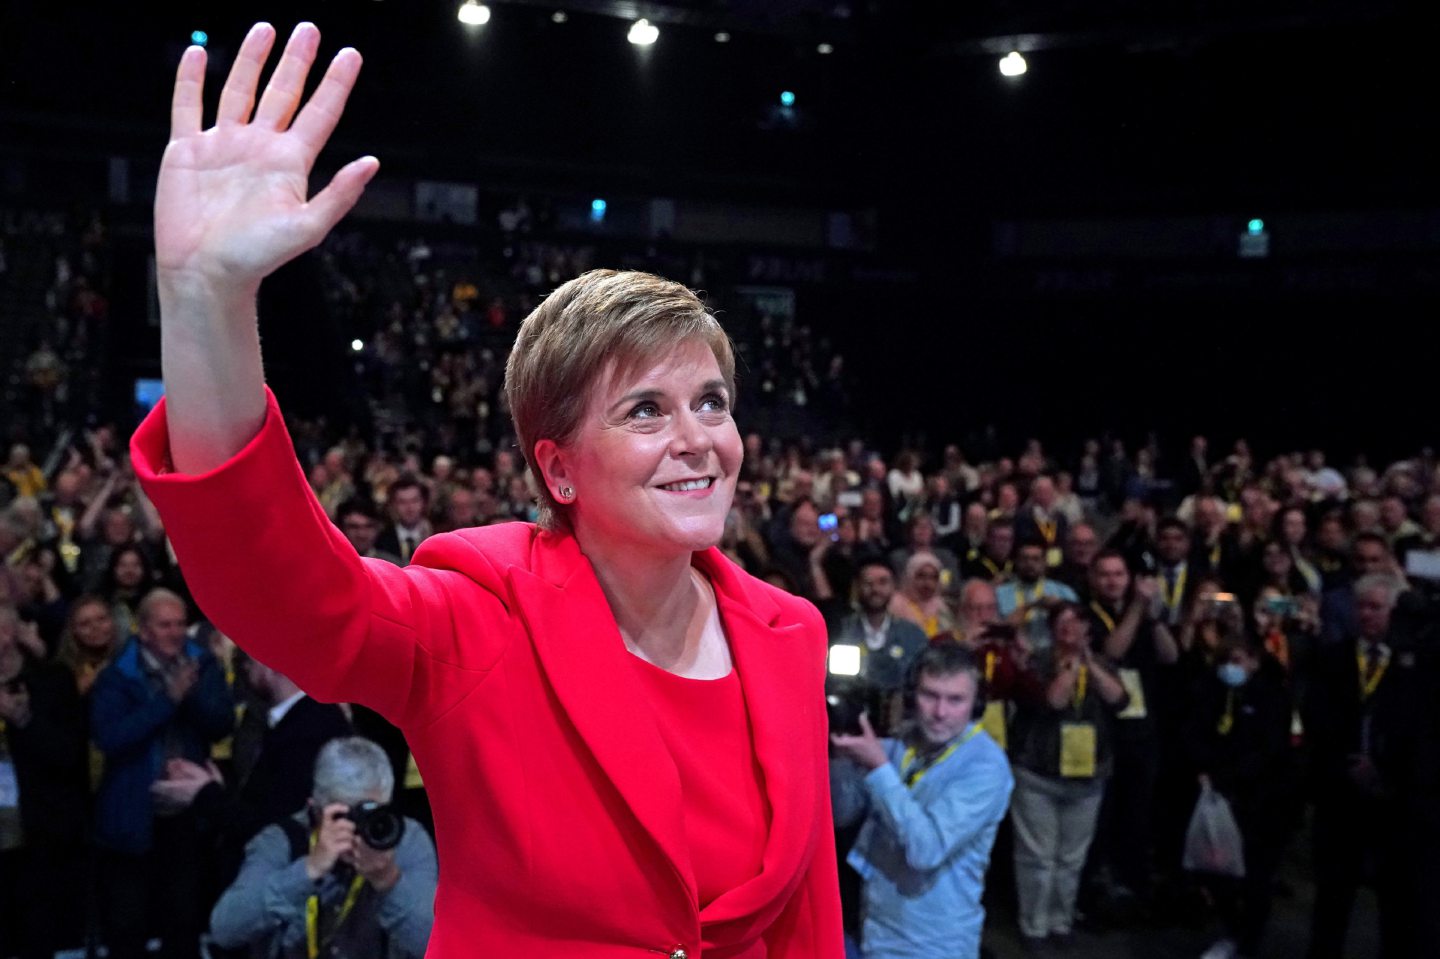 Nicola Sturgeon set out independence plan at SNP conference.